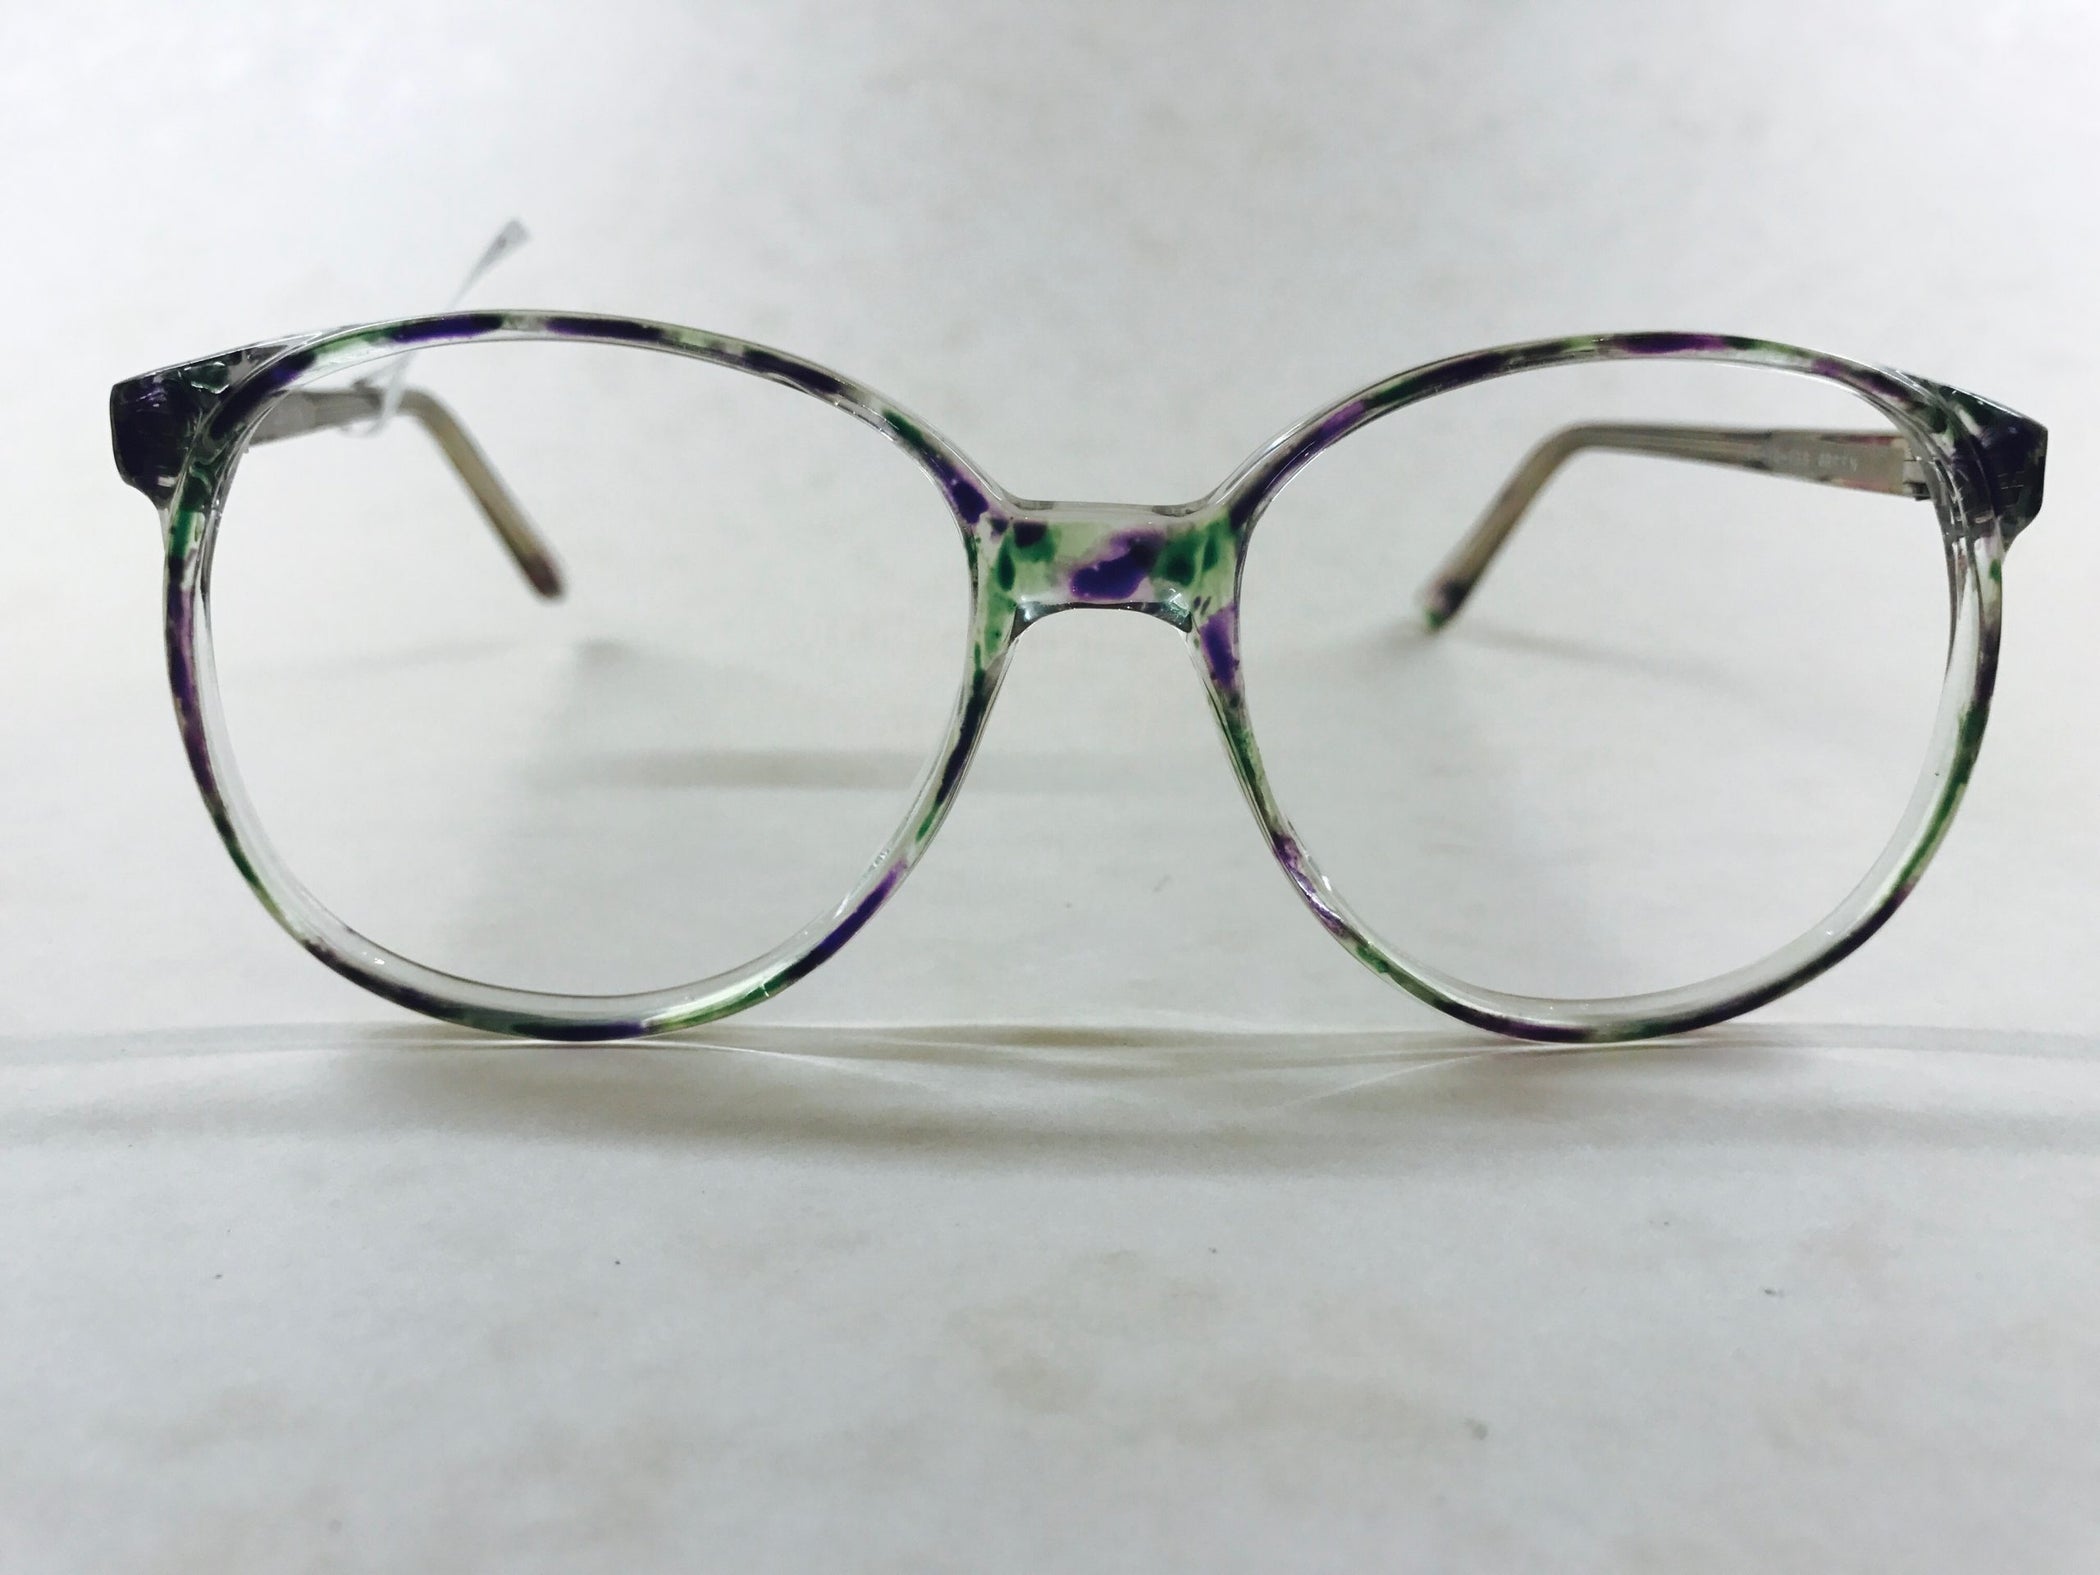 1980s crystal frame with green and purple mottle